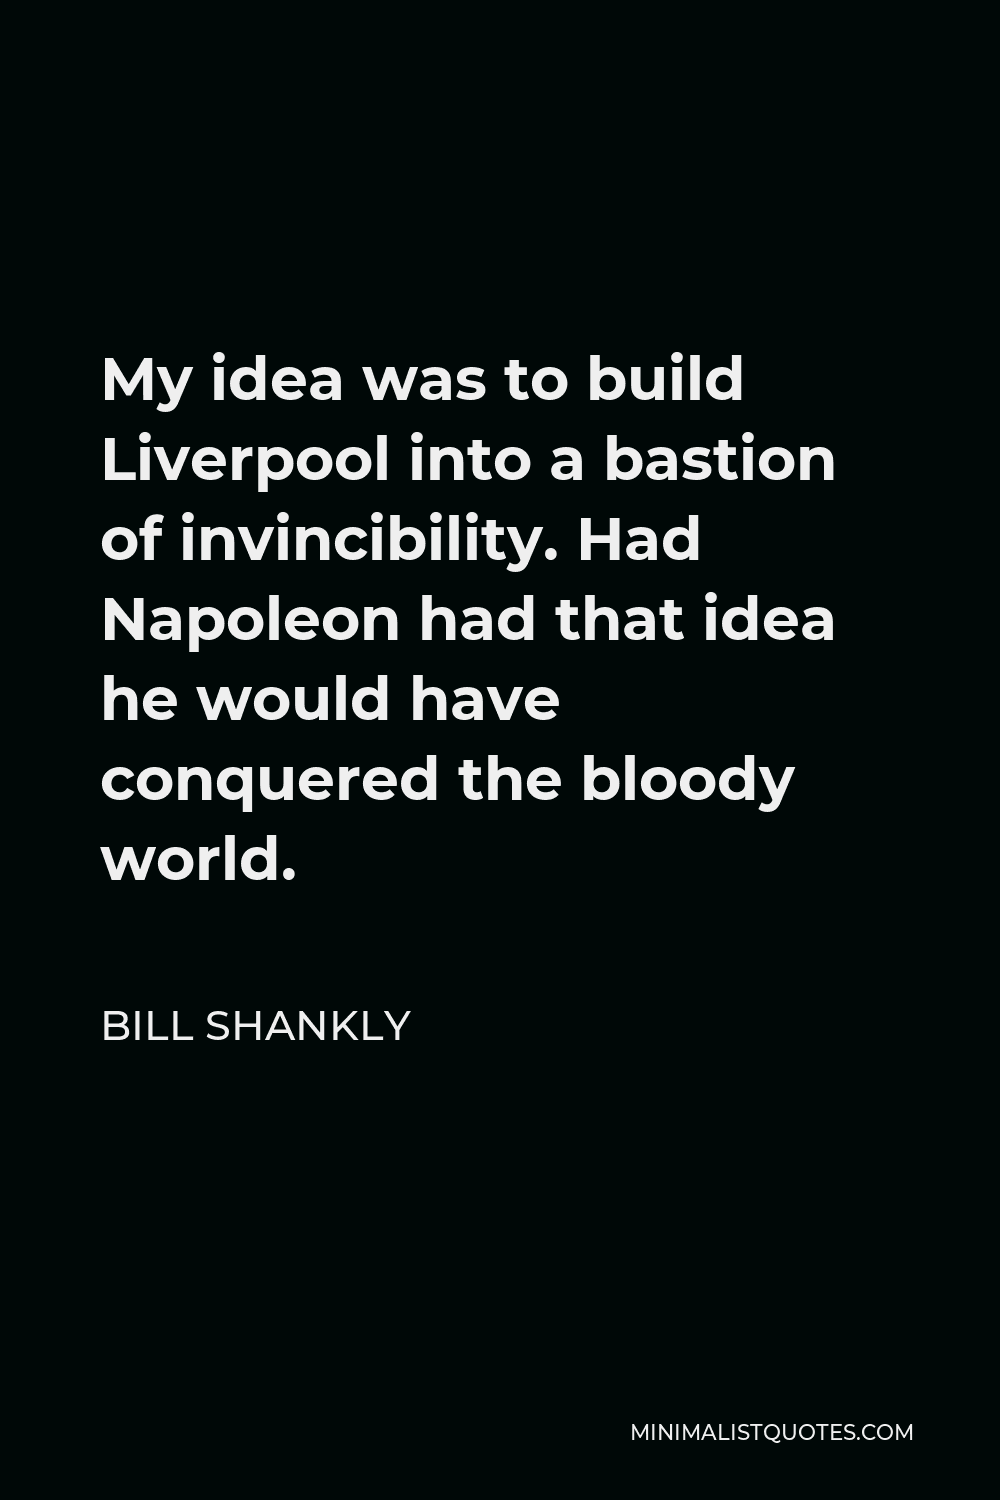 Bill Shankly Quote - My idea was to build Liverpool into a bastion of invincibility. Had Napoleon had that idea he would have conquered the bloody world.